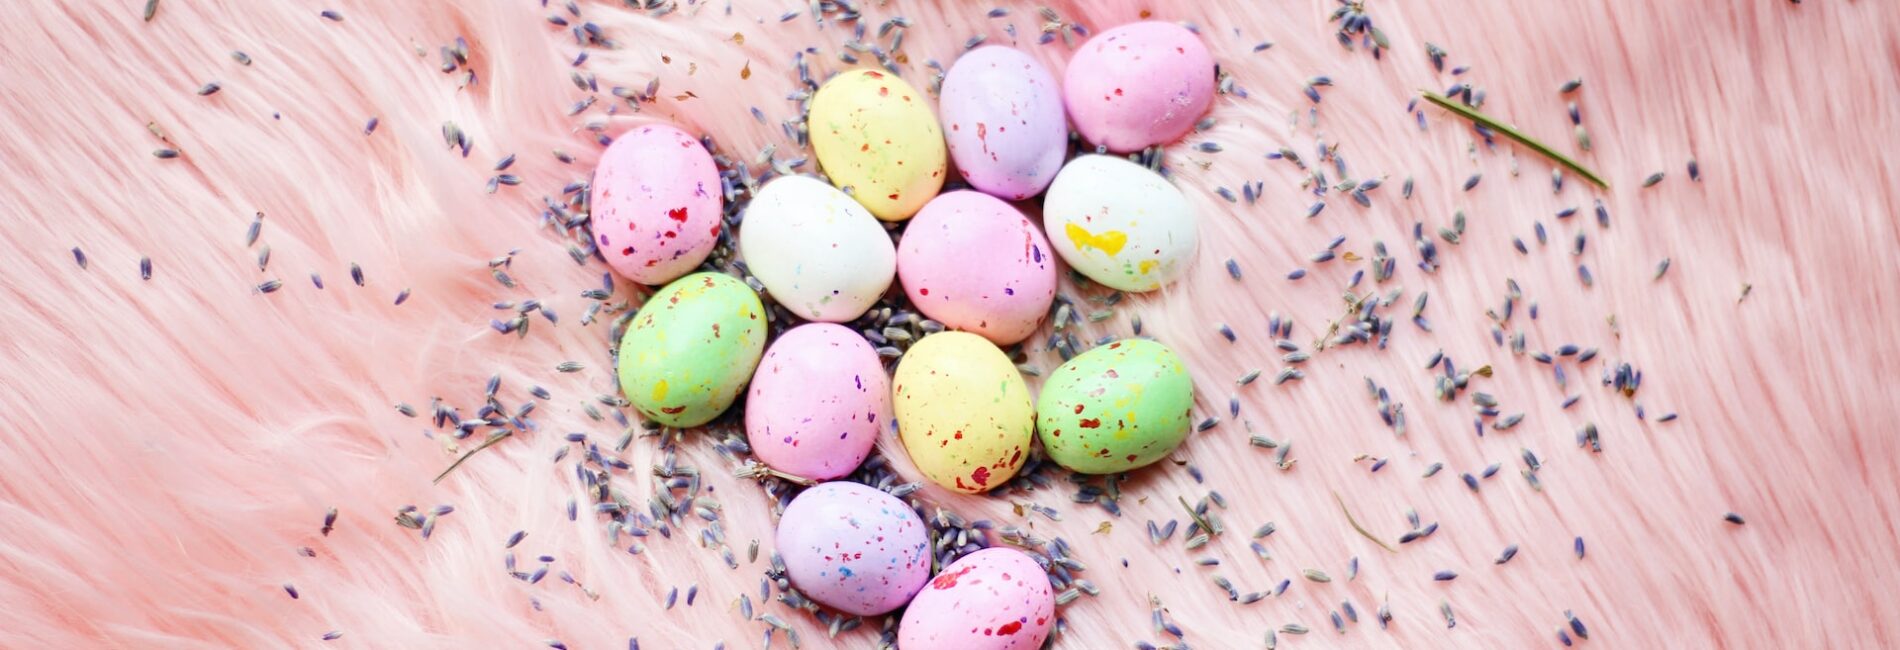 Egg-citing Toddler Easter Activities: New Egg Decorating Ideas for Spring